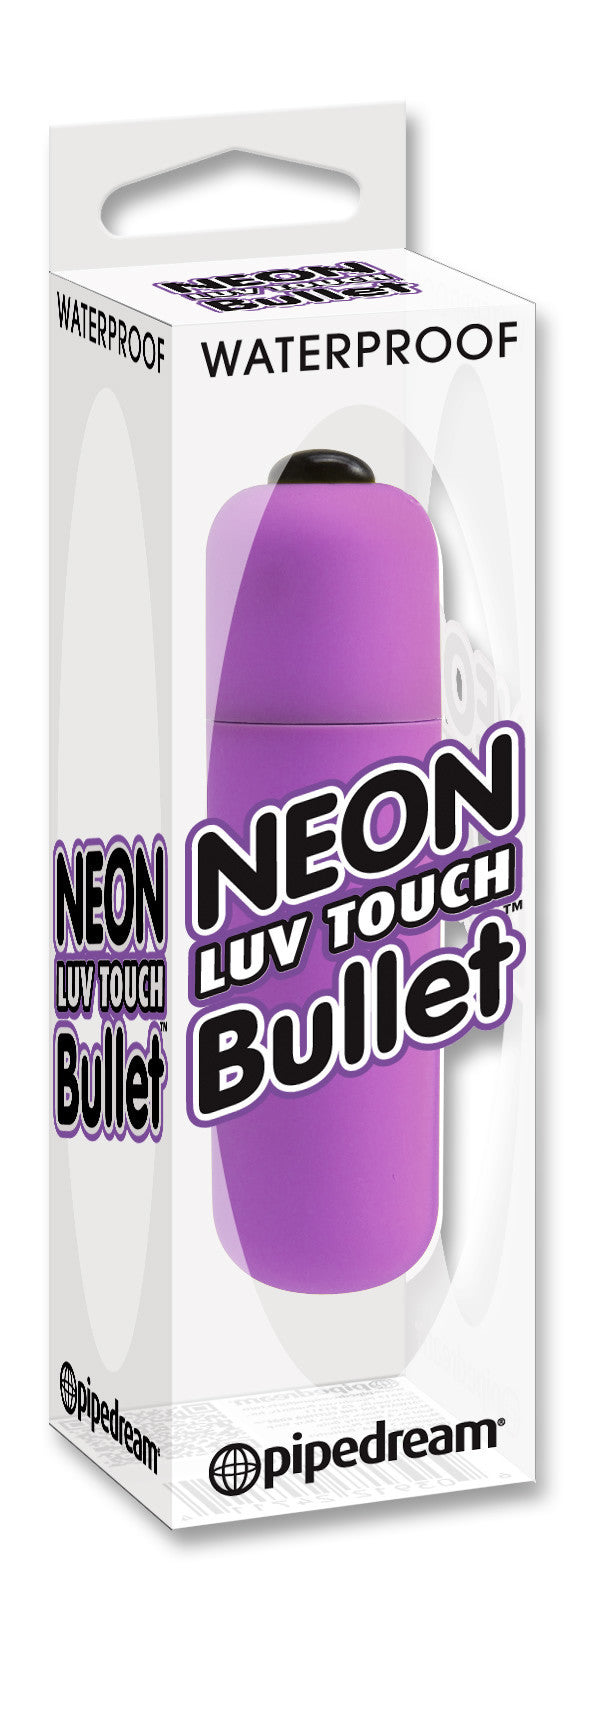 Neon Luv Touch Bullet  - Club X